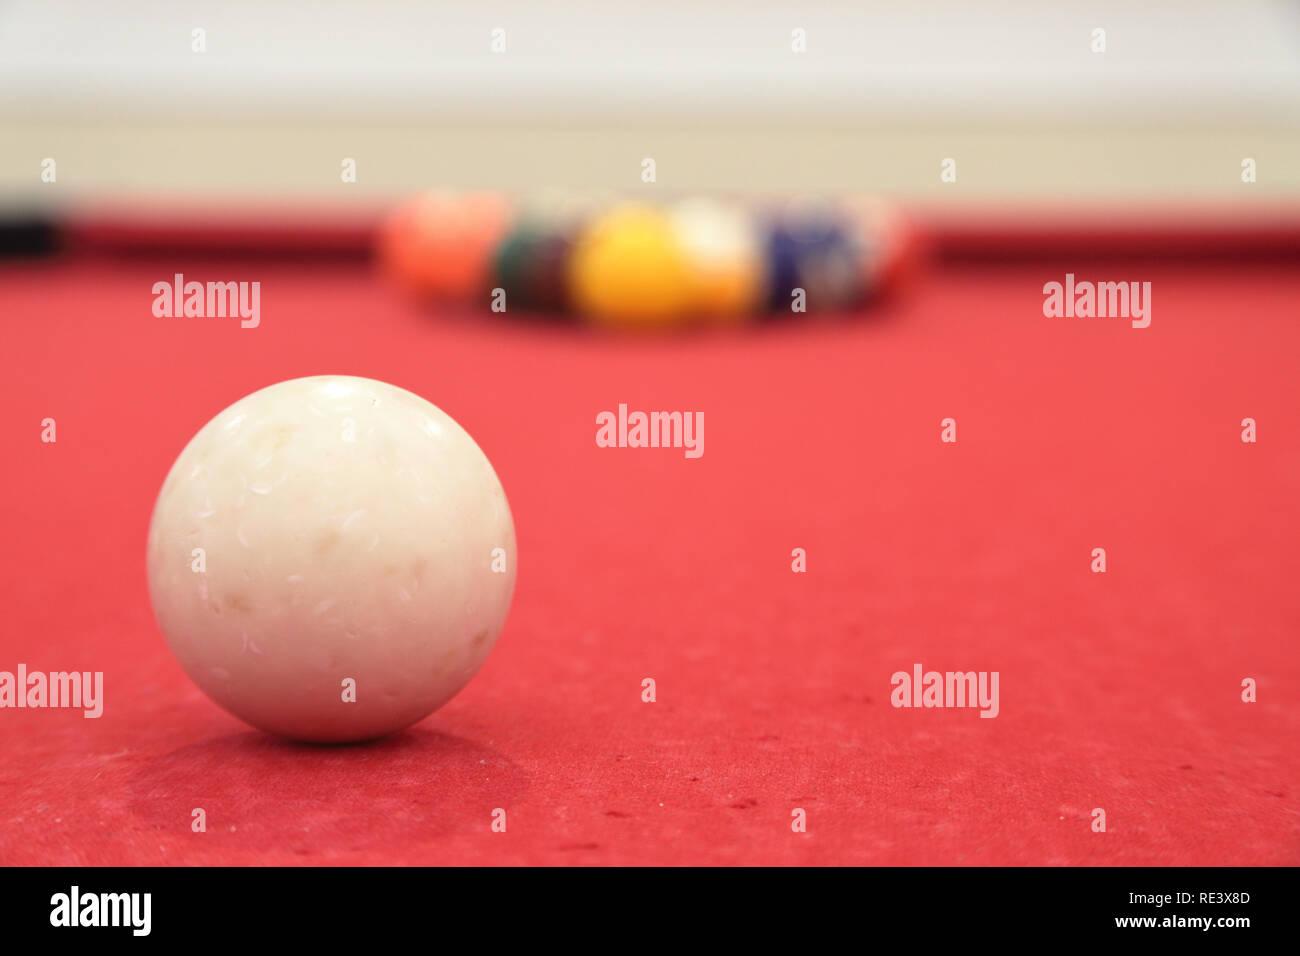 Billiards pool table with cue ball in focus, racked balls very out of foucs, shallow depth of field Stock Photo